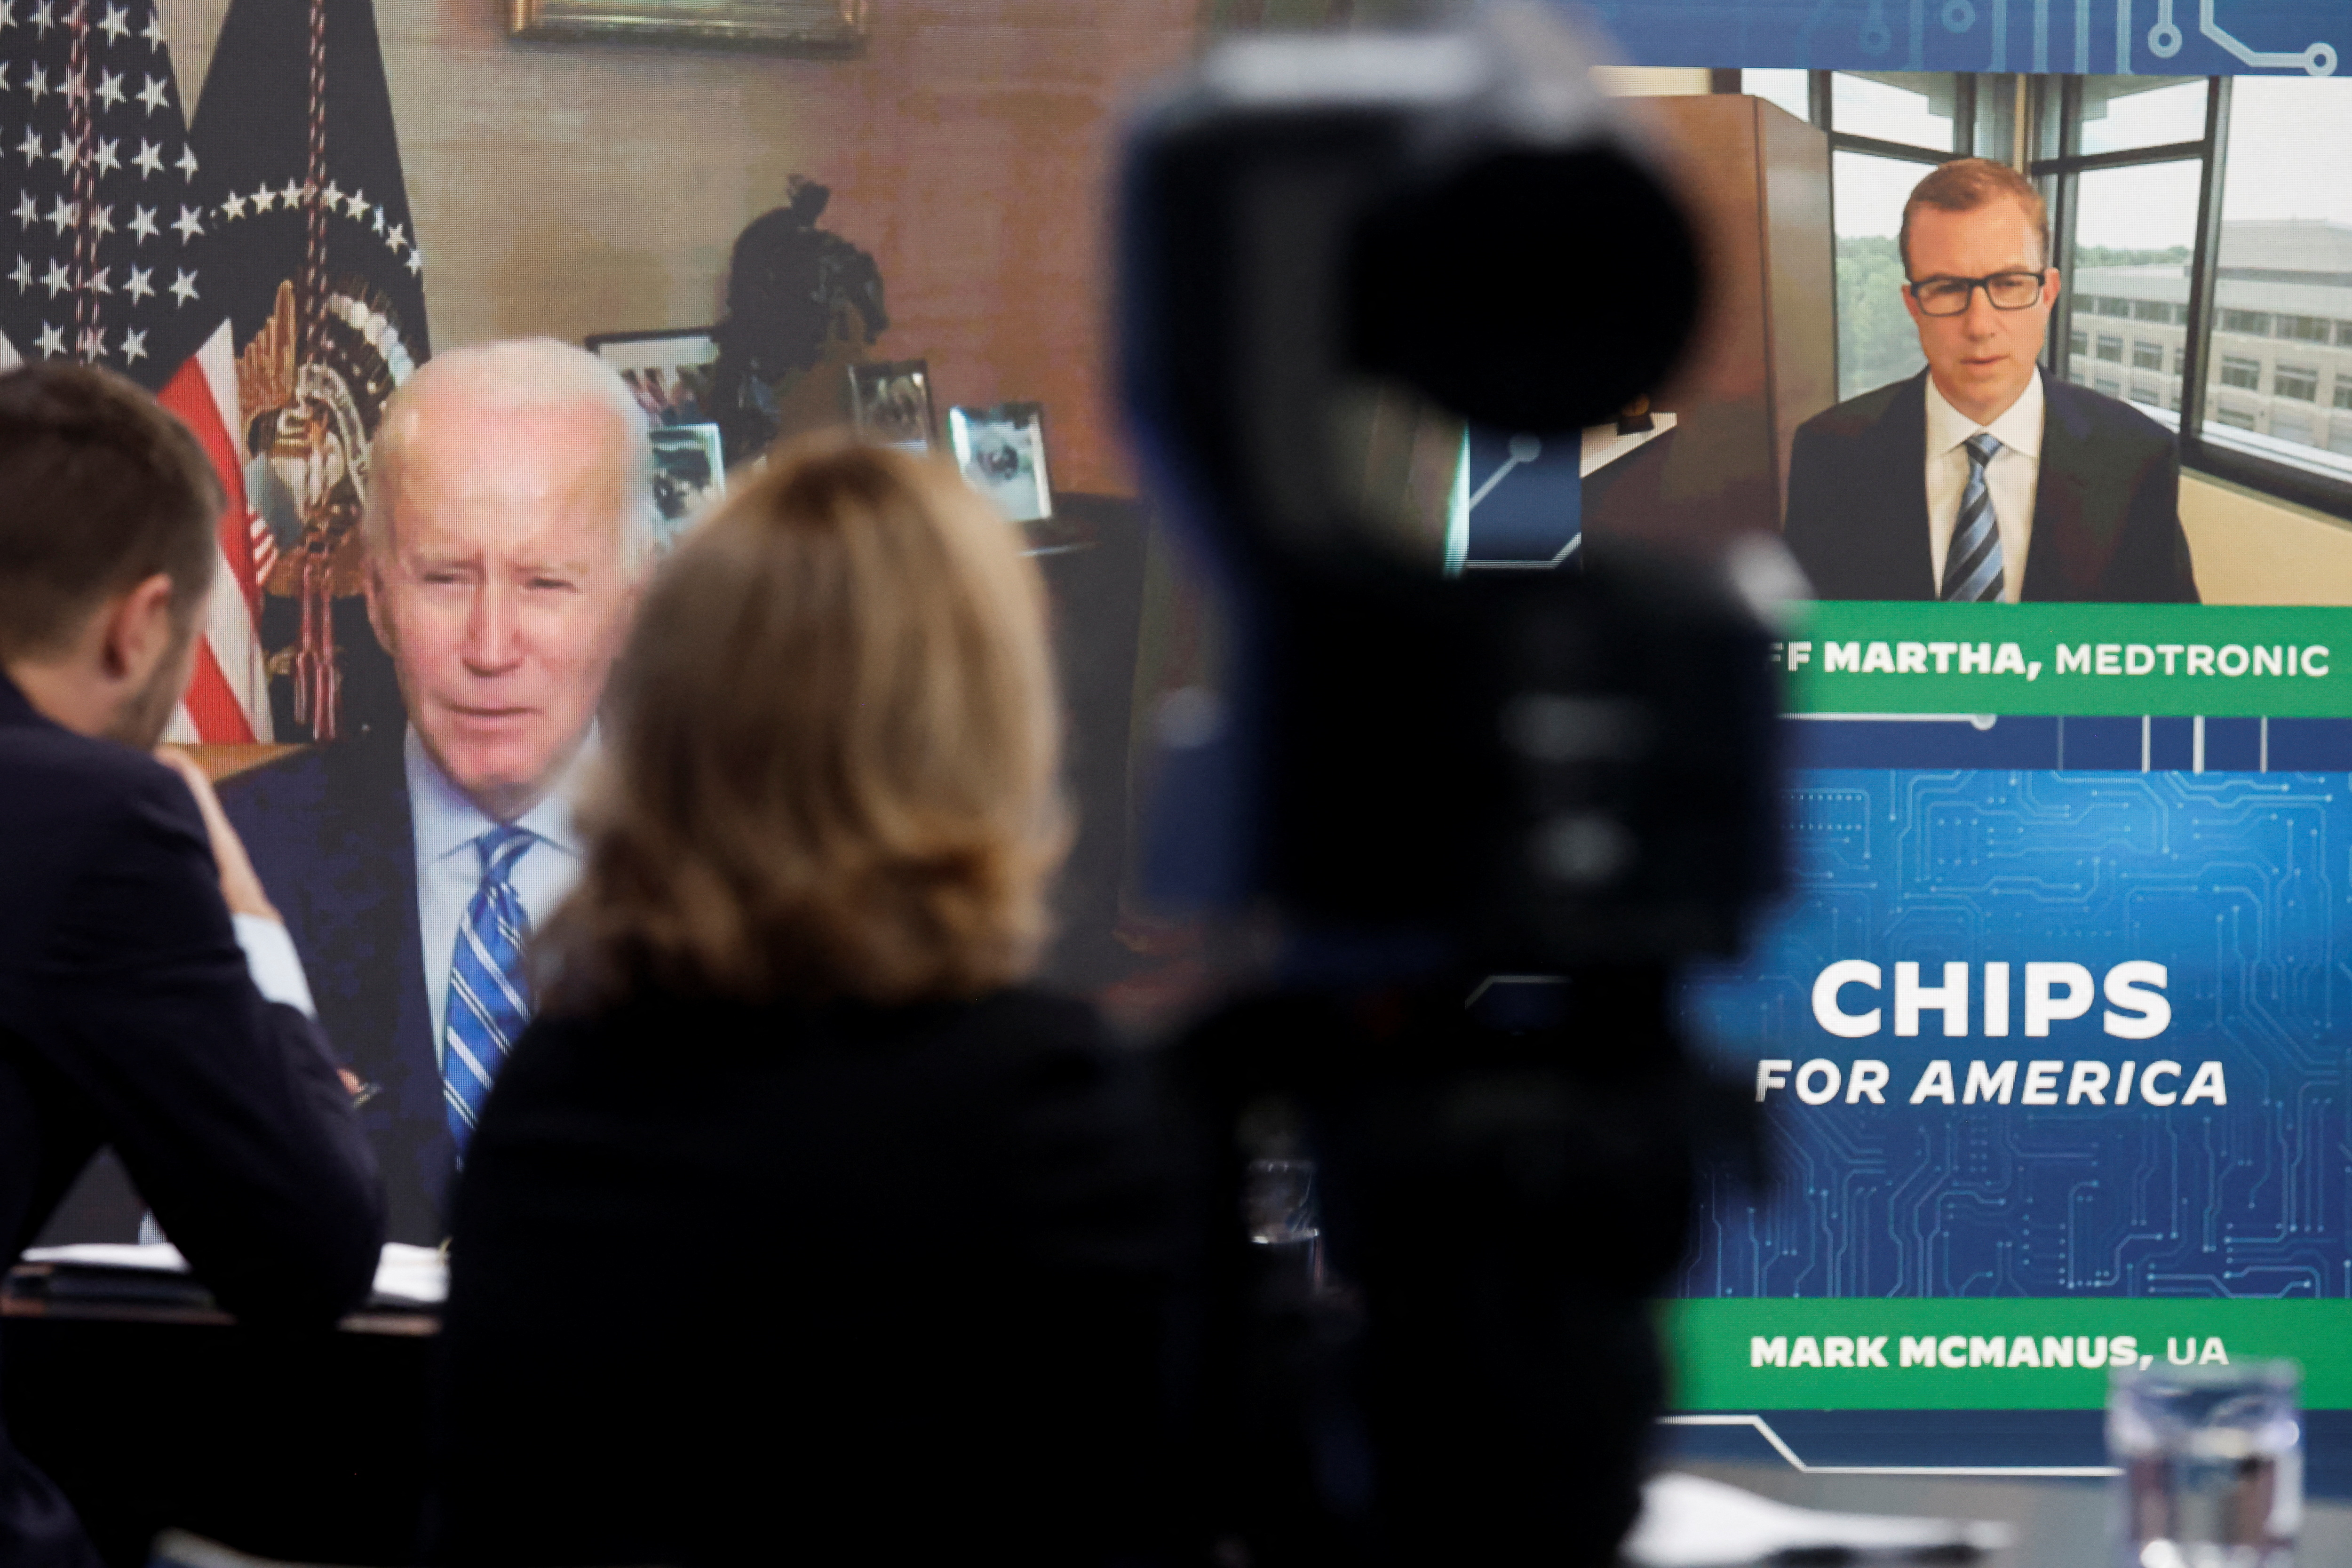 U.S. President Biden virtual meeting with business and labor leaders about the Chips Act in Washington